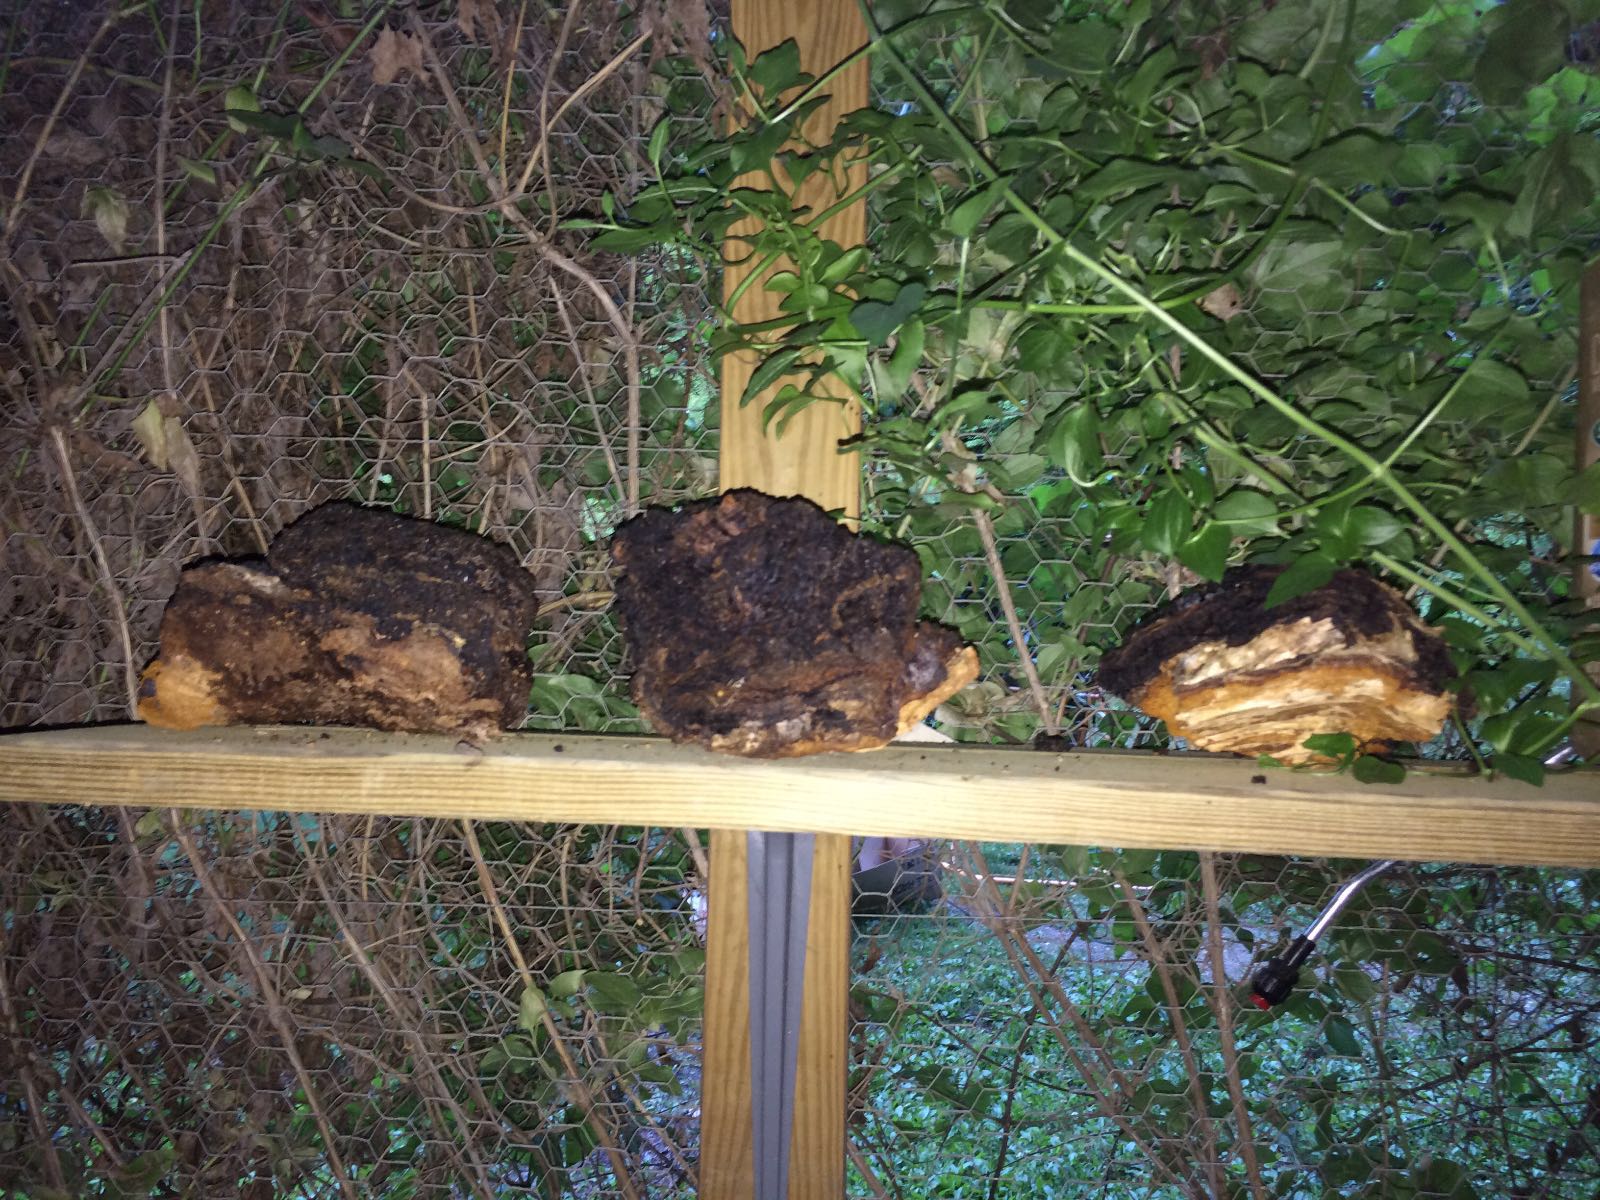 Dr. Mullaly harvests and dries the Chaga